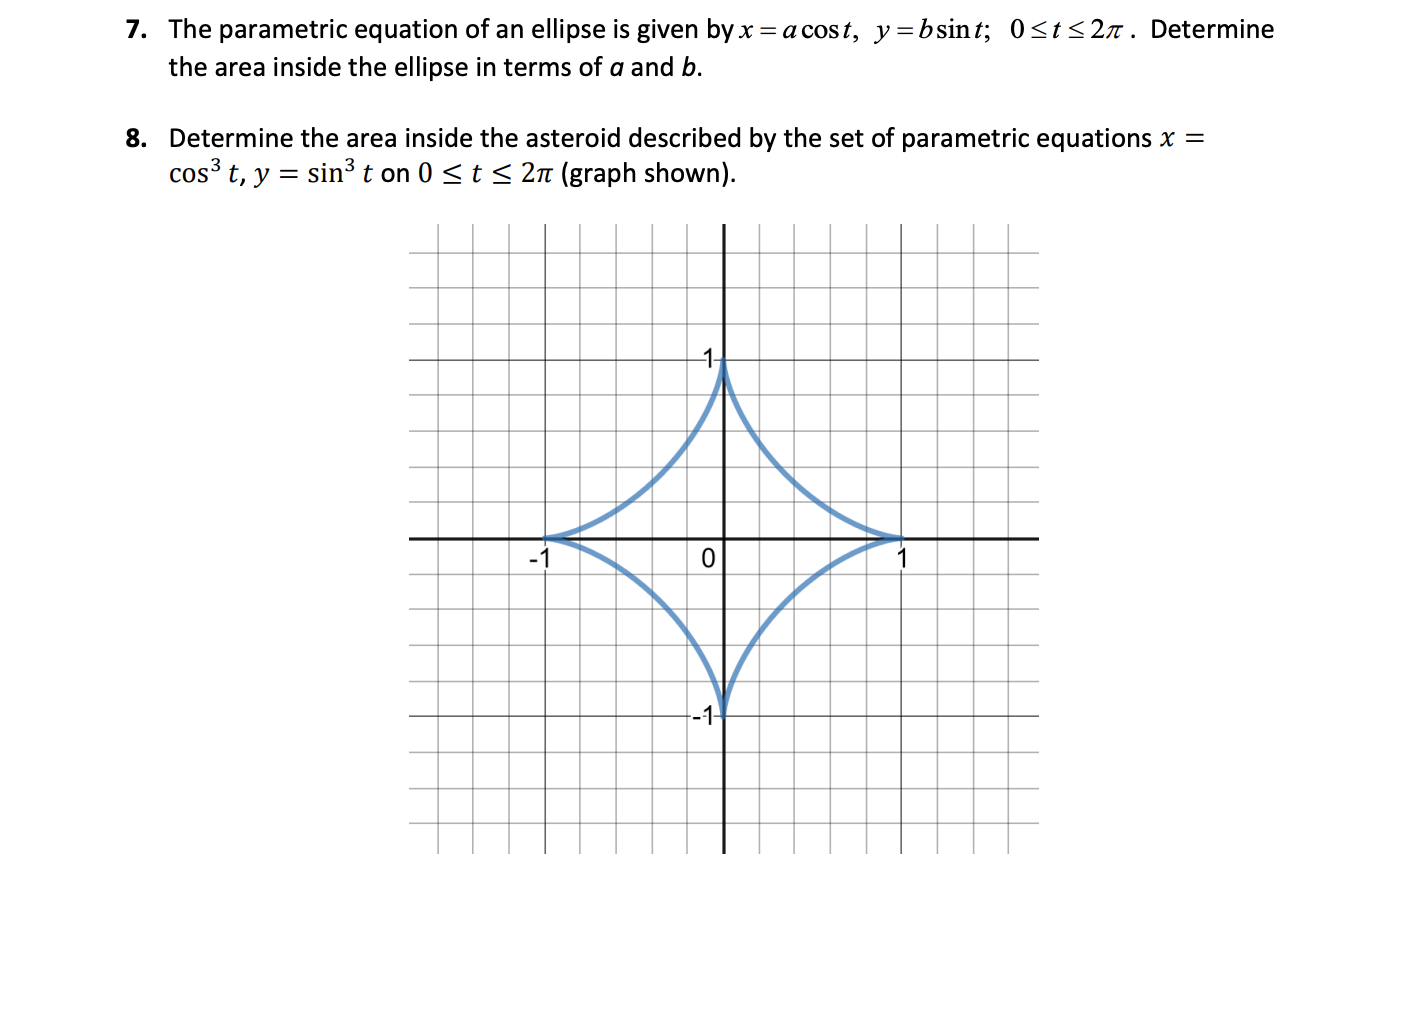 7. The parametric equation of an ellipse is given by x = a cost, y=bsint; 0<t<2n. Determine
the area inside the ellipse in terms of a and b.
